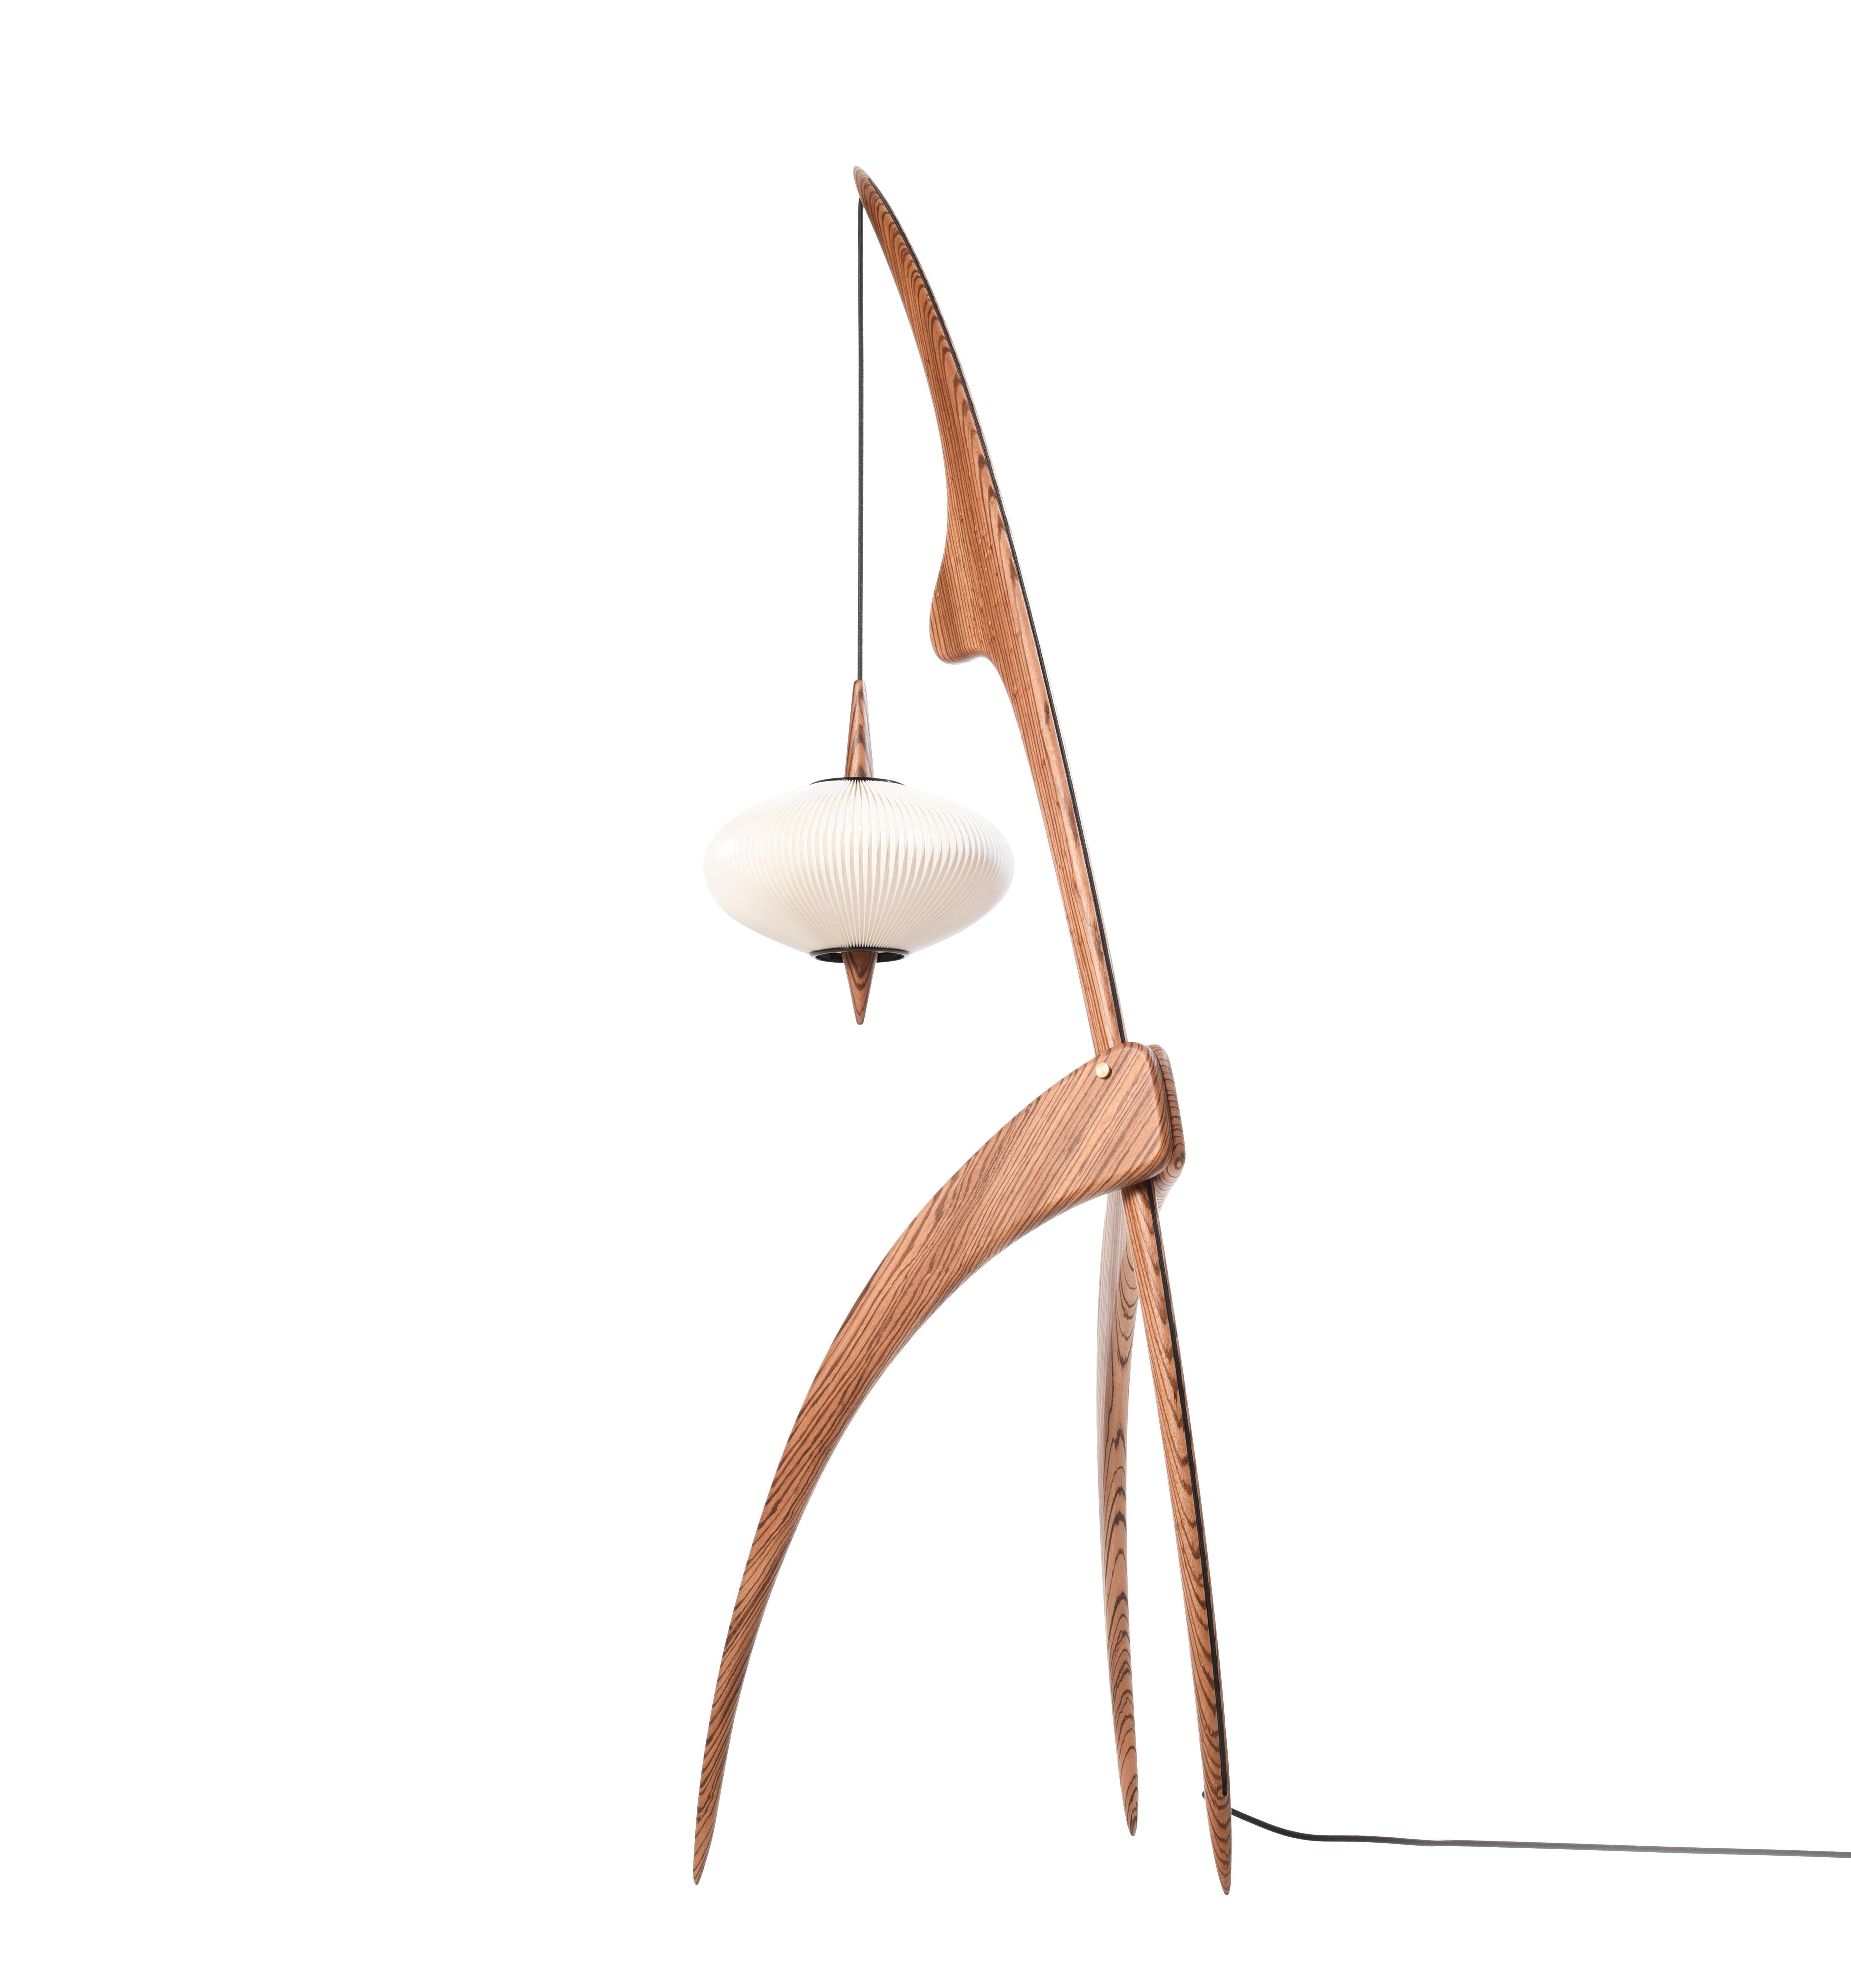 Limited edition Rispal 'Praying Mantis Zébrant' floor lamp in zebra wood. The iconic model #14.950 was originally designed in 1950 by François Rispal. This extremely limited edition model (1 of 6) is executed in richly grained zebra wood with a